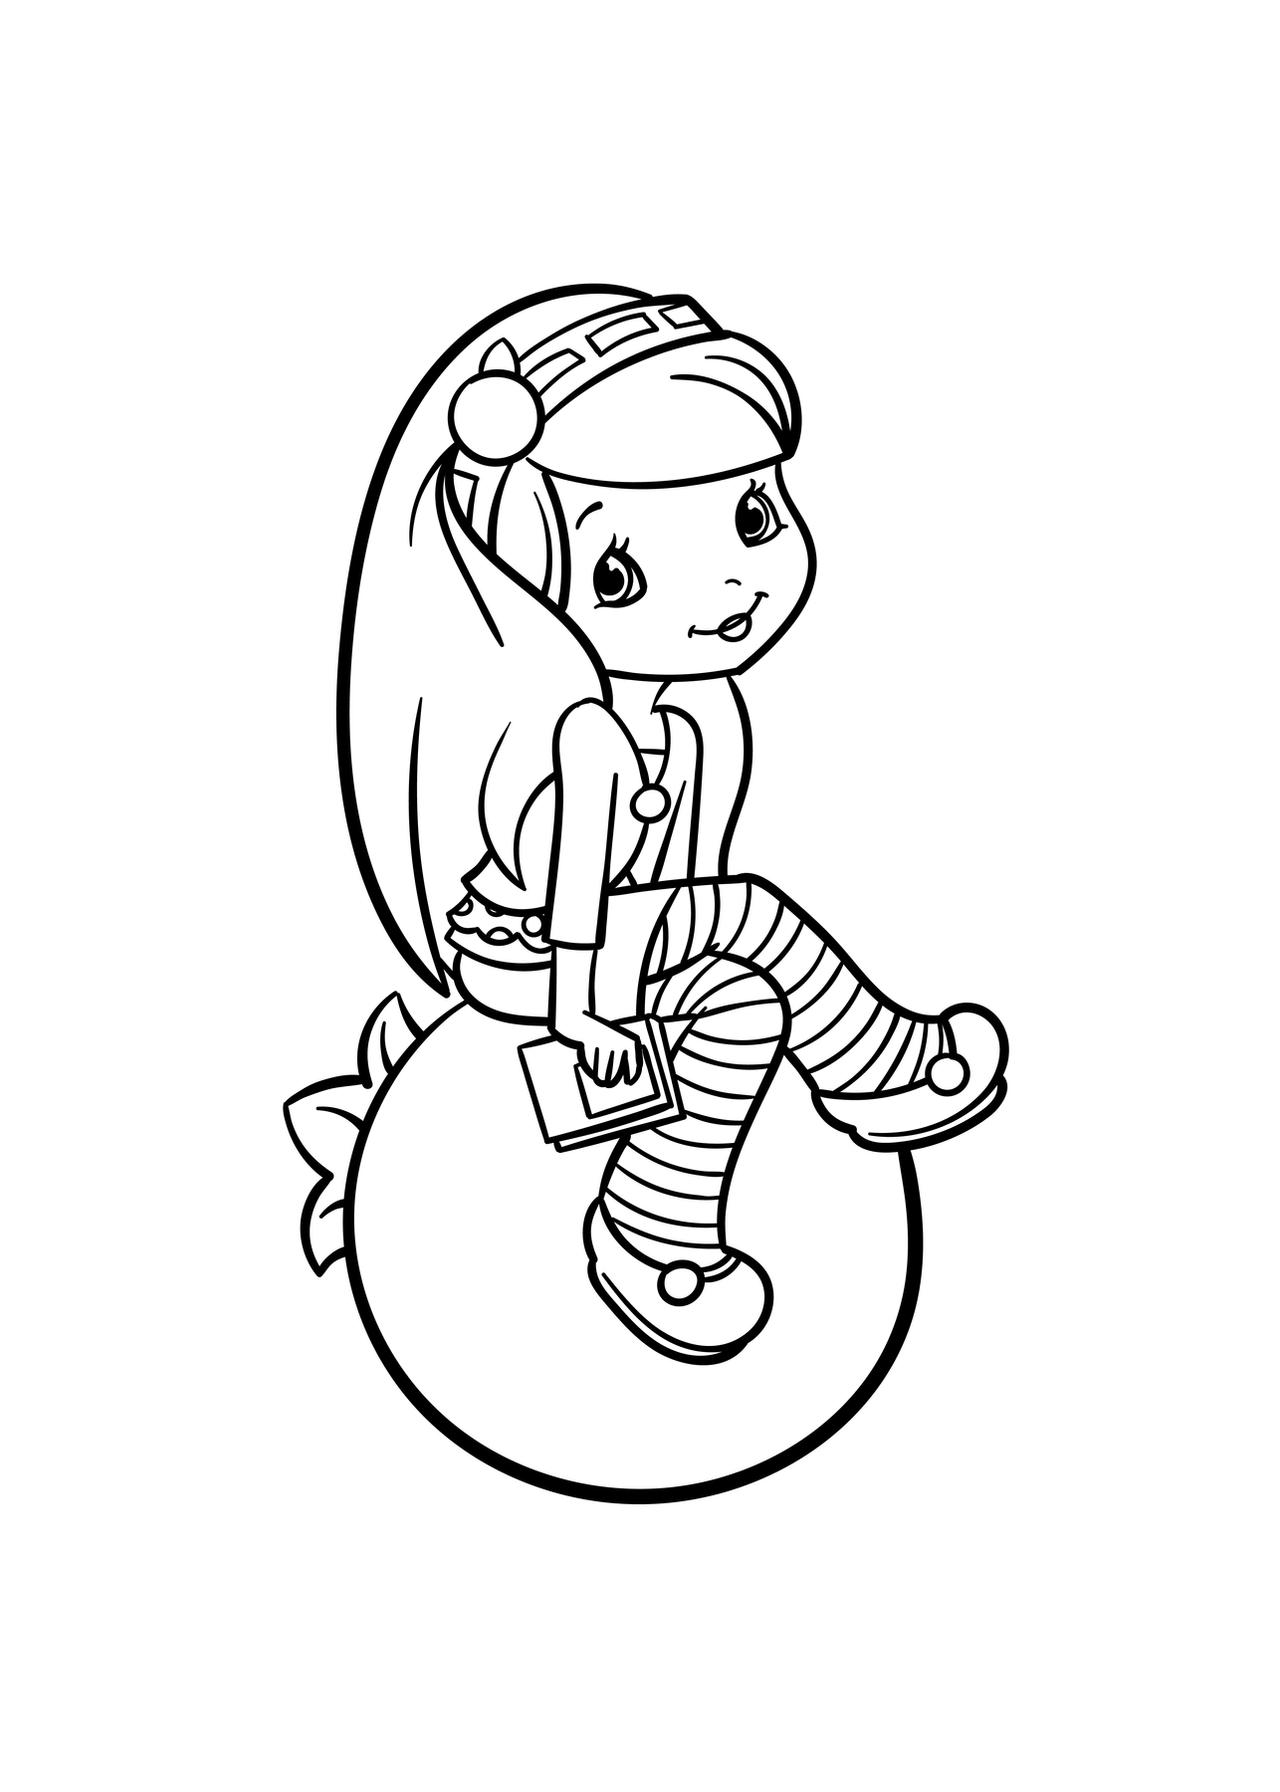 Strawberry shortcake coloring pages by coloringpageswk on